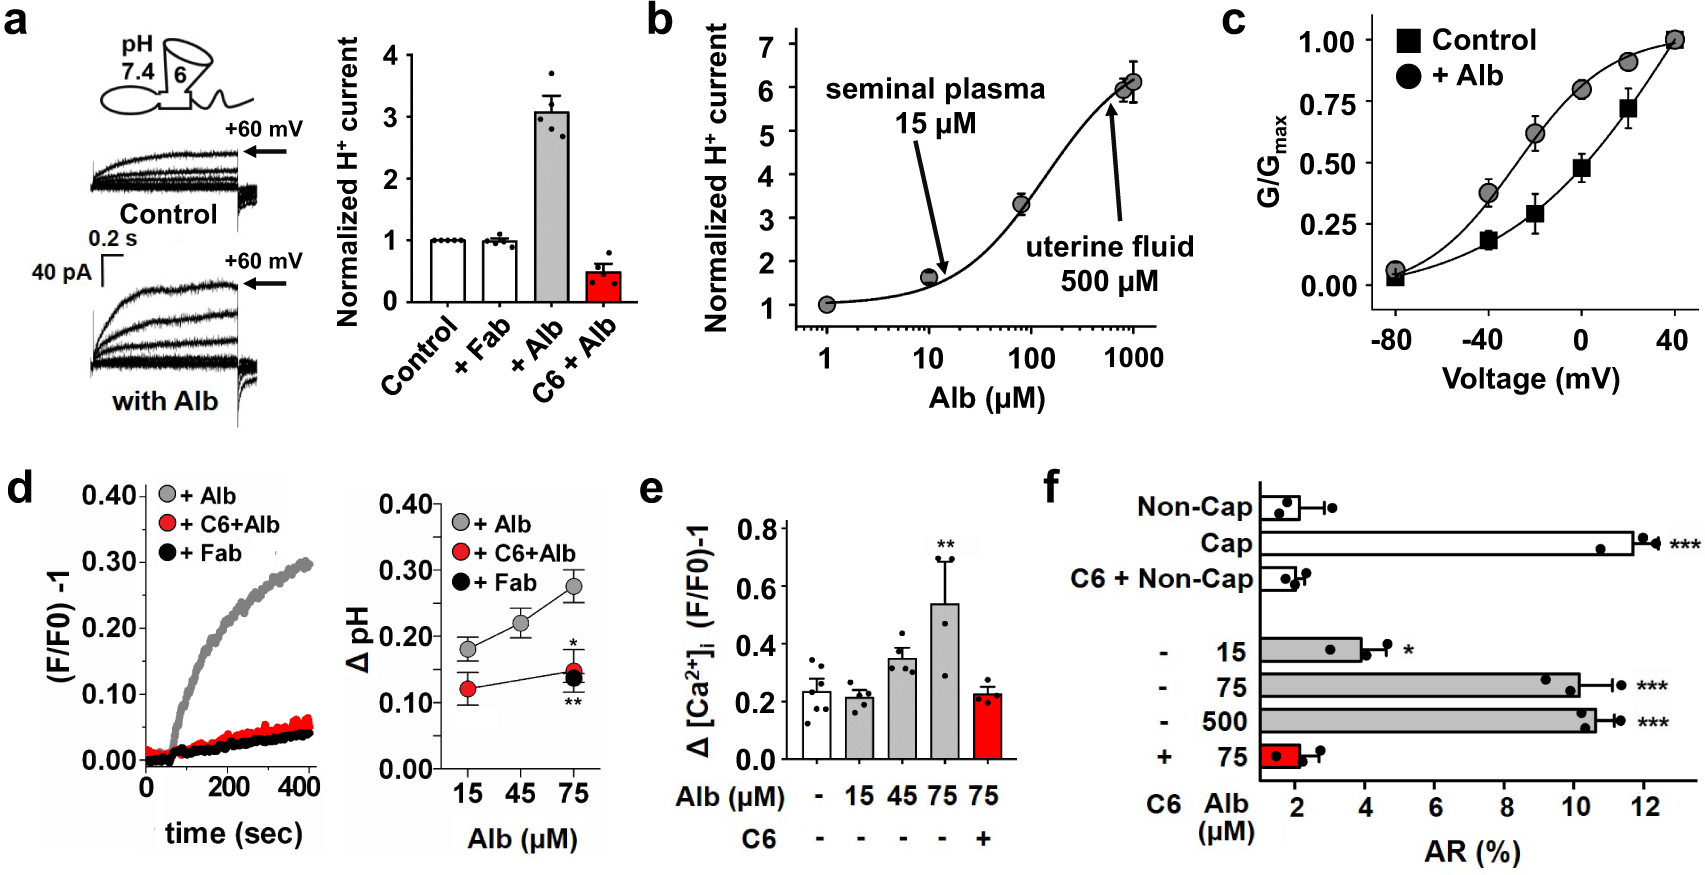 Direct Activation Of The Proton Channel By Albumin Leads To Human Sperm Capacitation And Sustained Release Of Inflammatory Mediators By Neutrophils Nature Communications